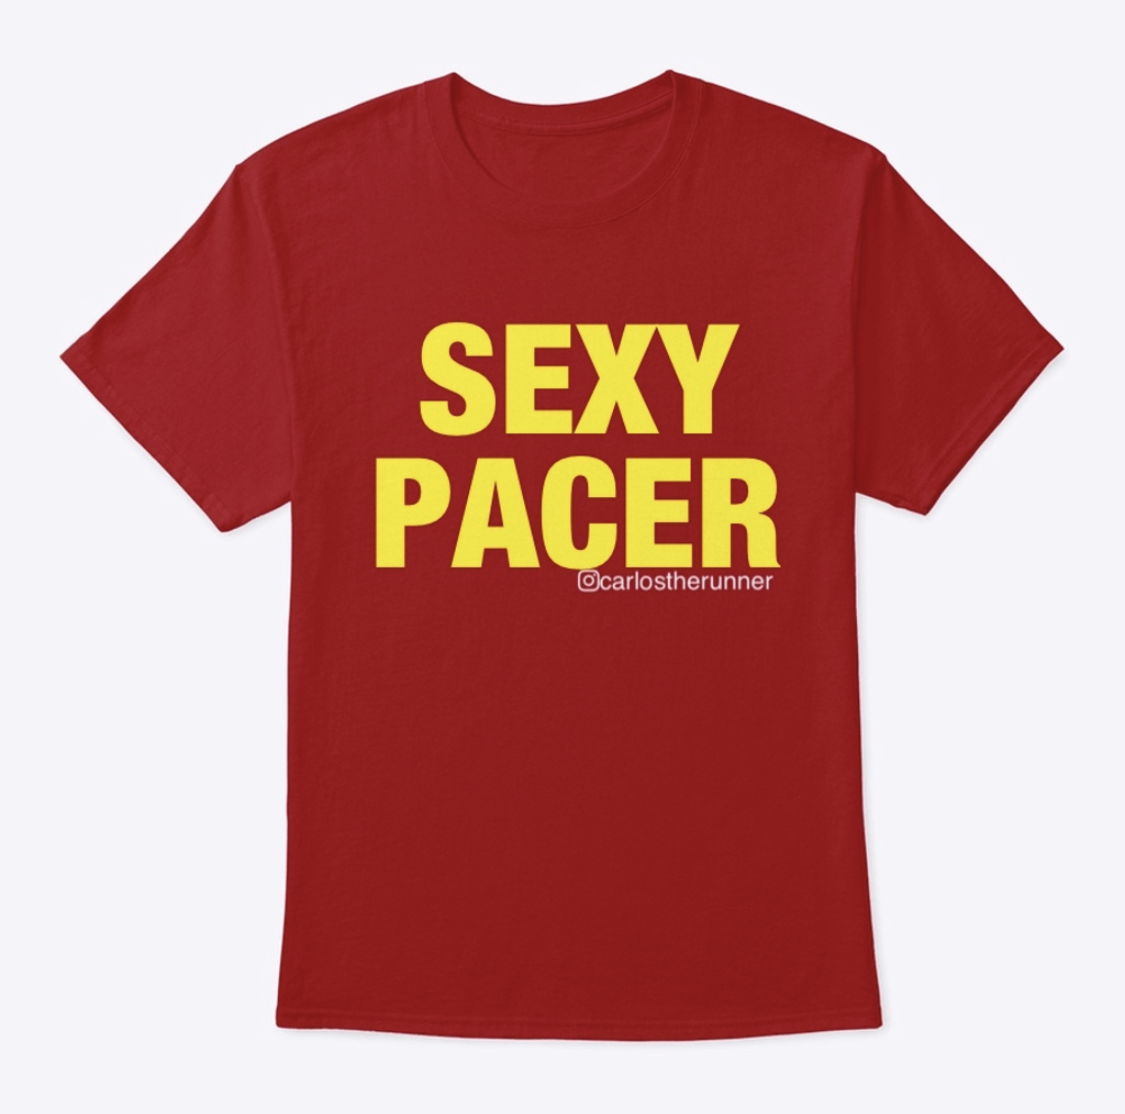 Sexy Pacer - Tee